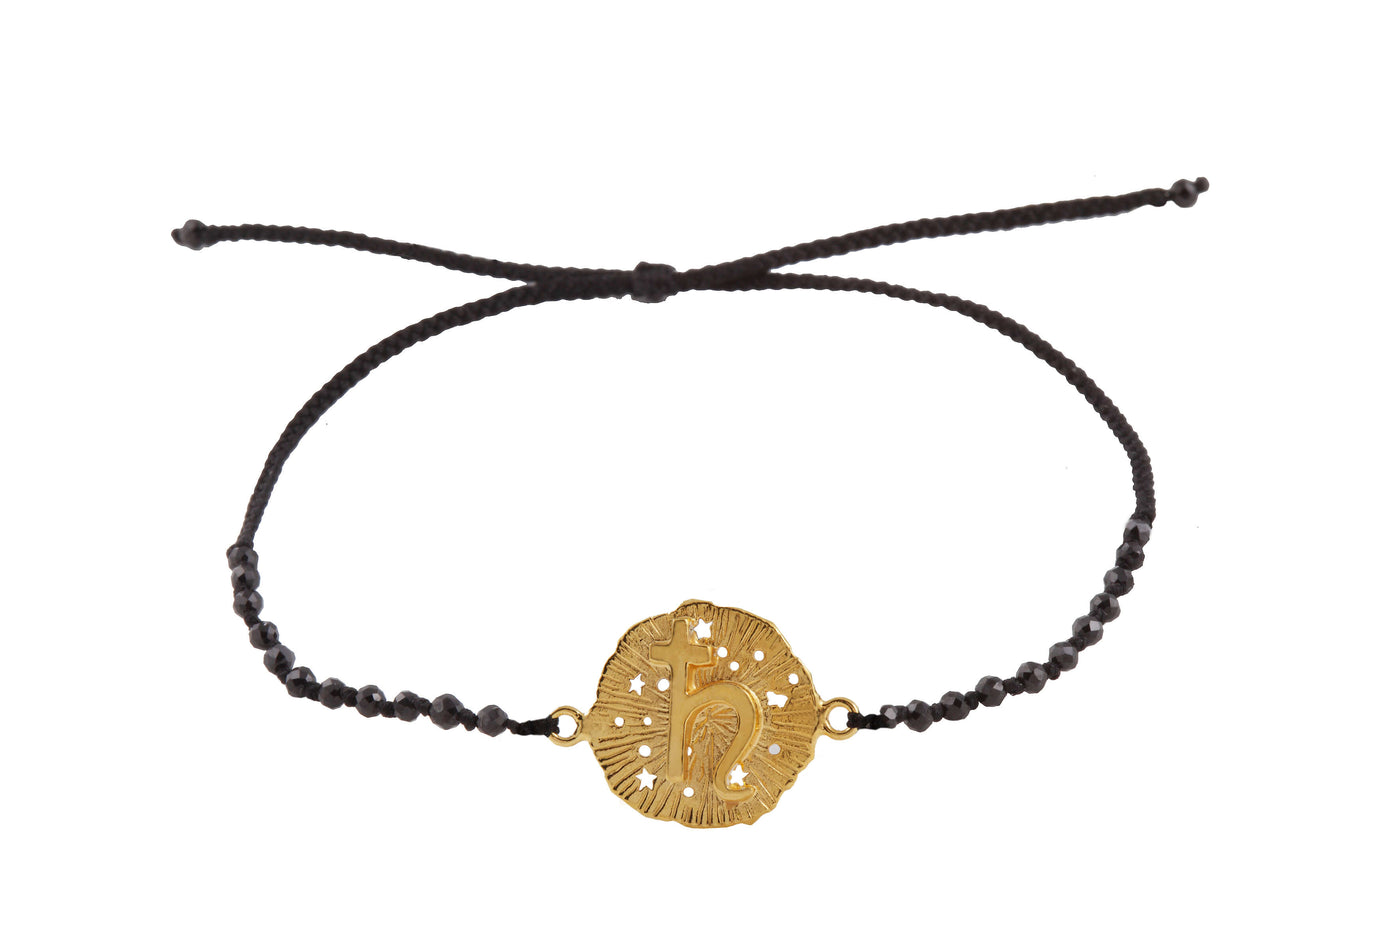 Saturn Medallion Amulet bracelet with beads. Gold plated